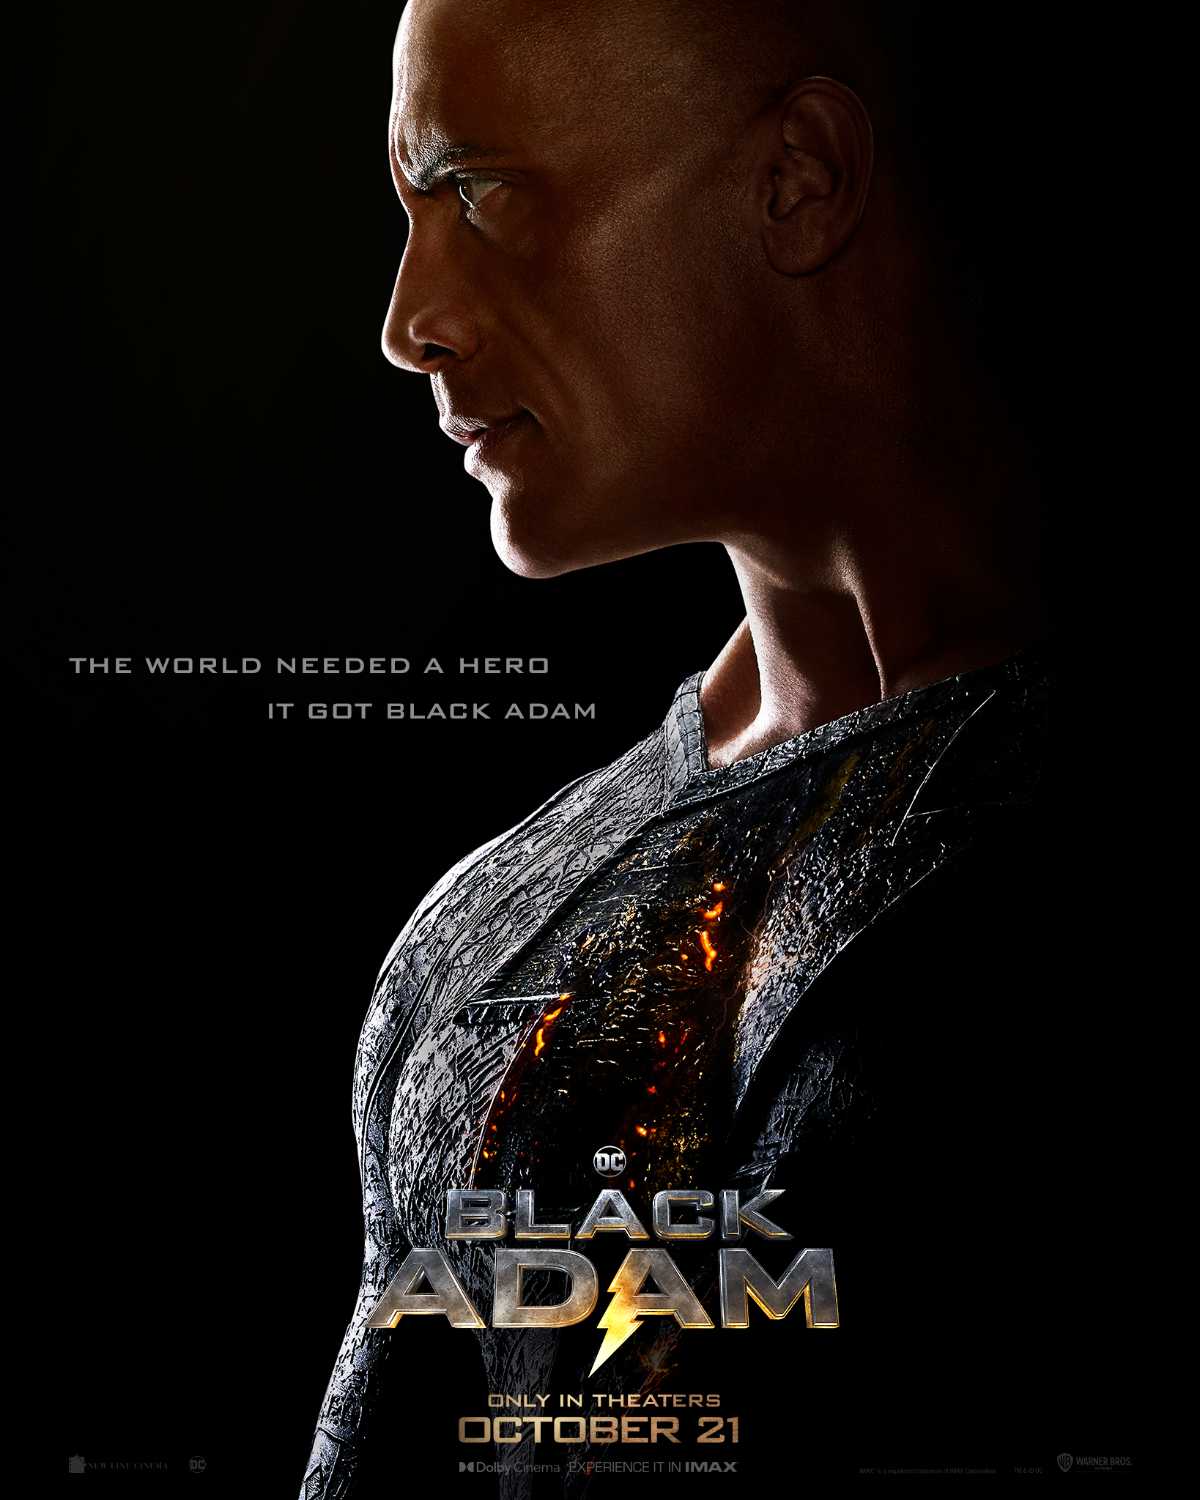 Black Adam Trailer and Poster Released!